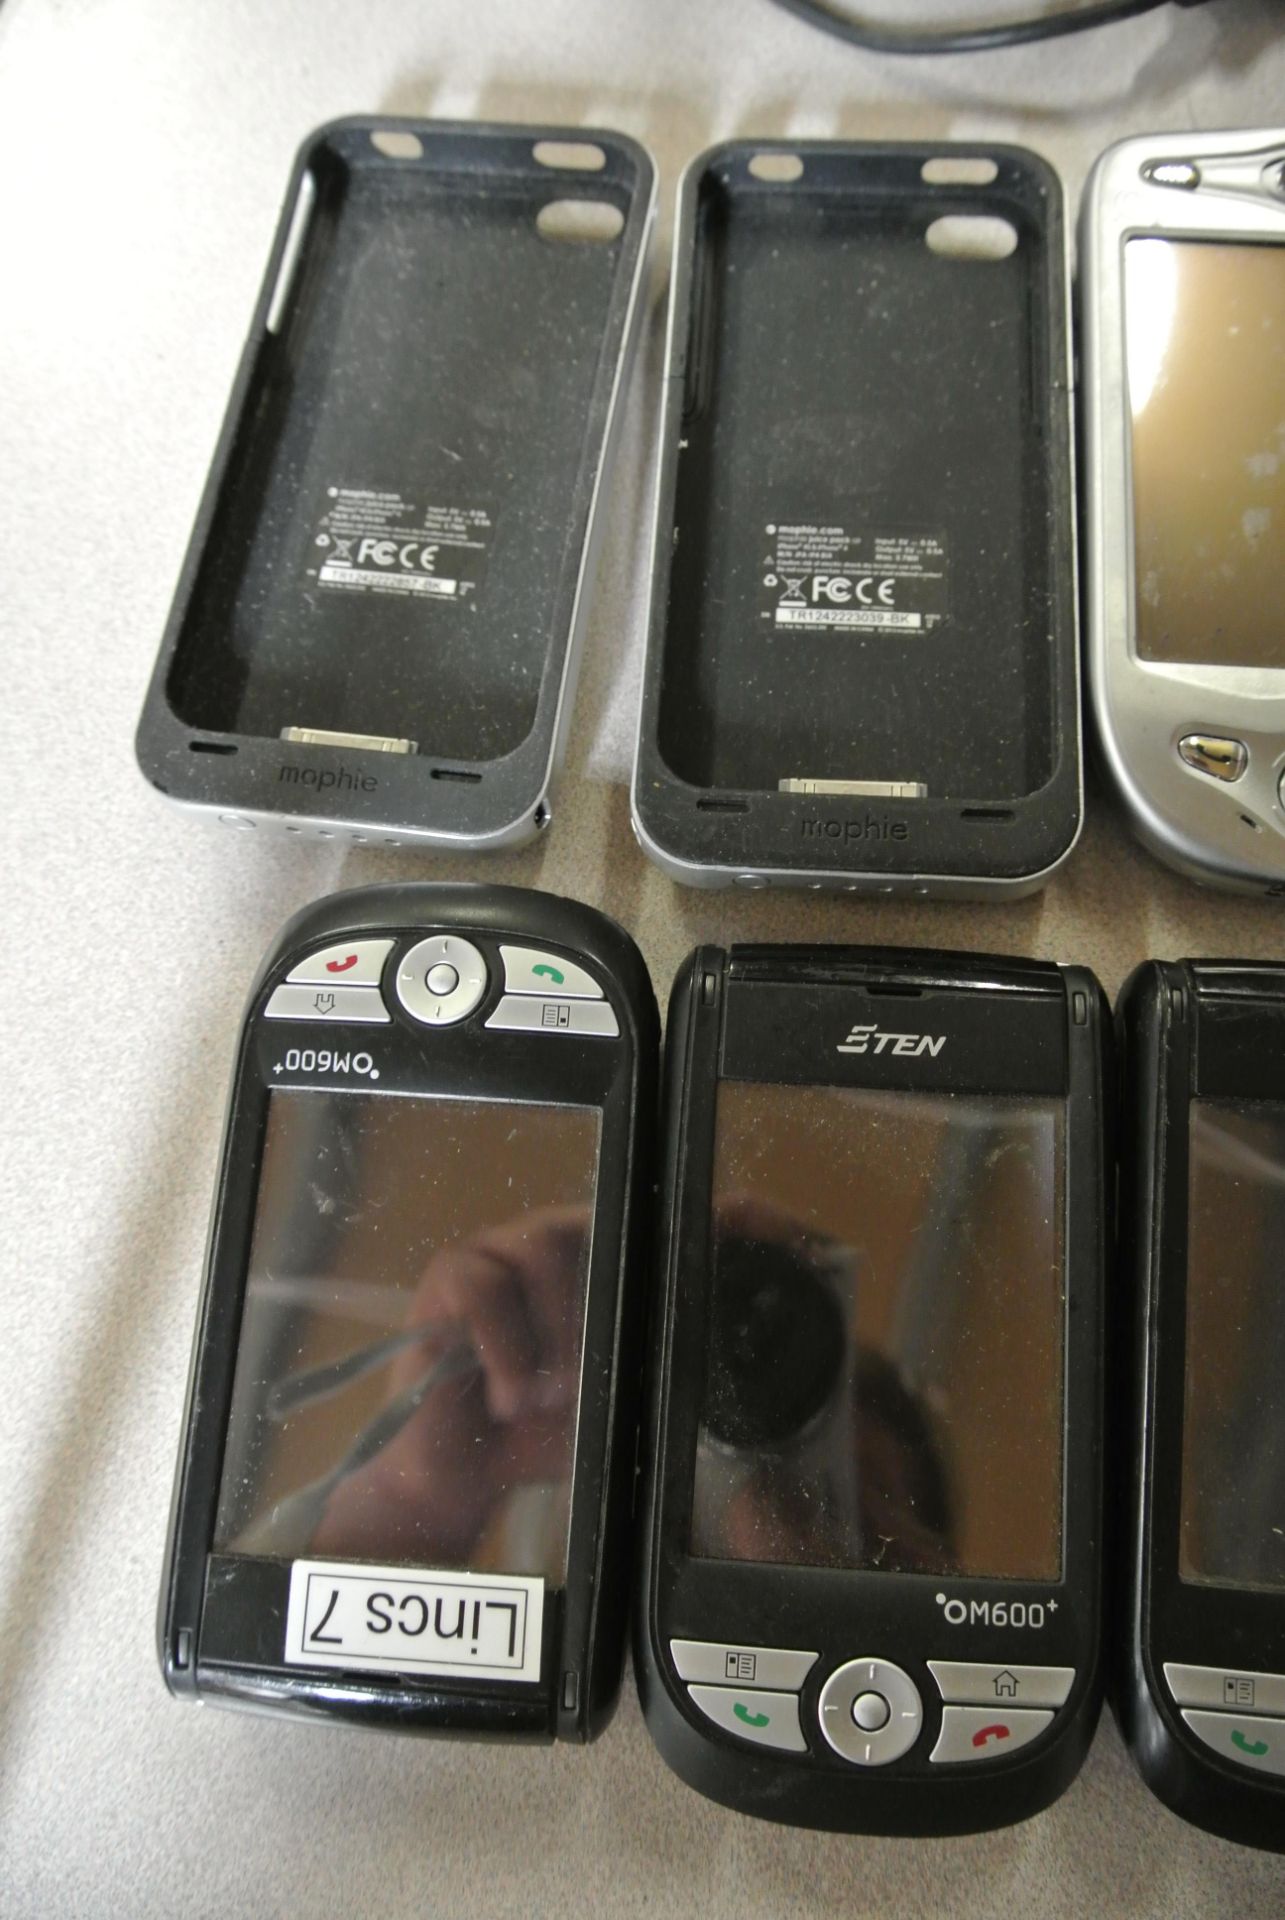 Large lot of multiple mobile phones and accessories, including - 1 x ETEN Pocket PC + 5 x ETEN OM600 - Image 7 of 7